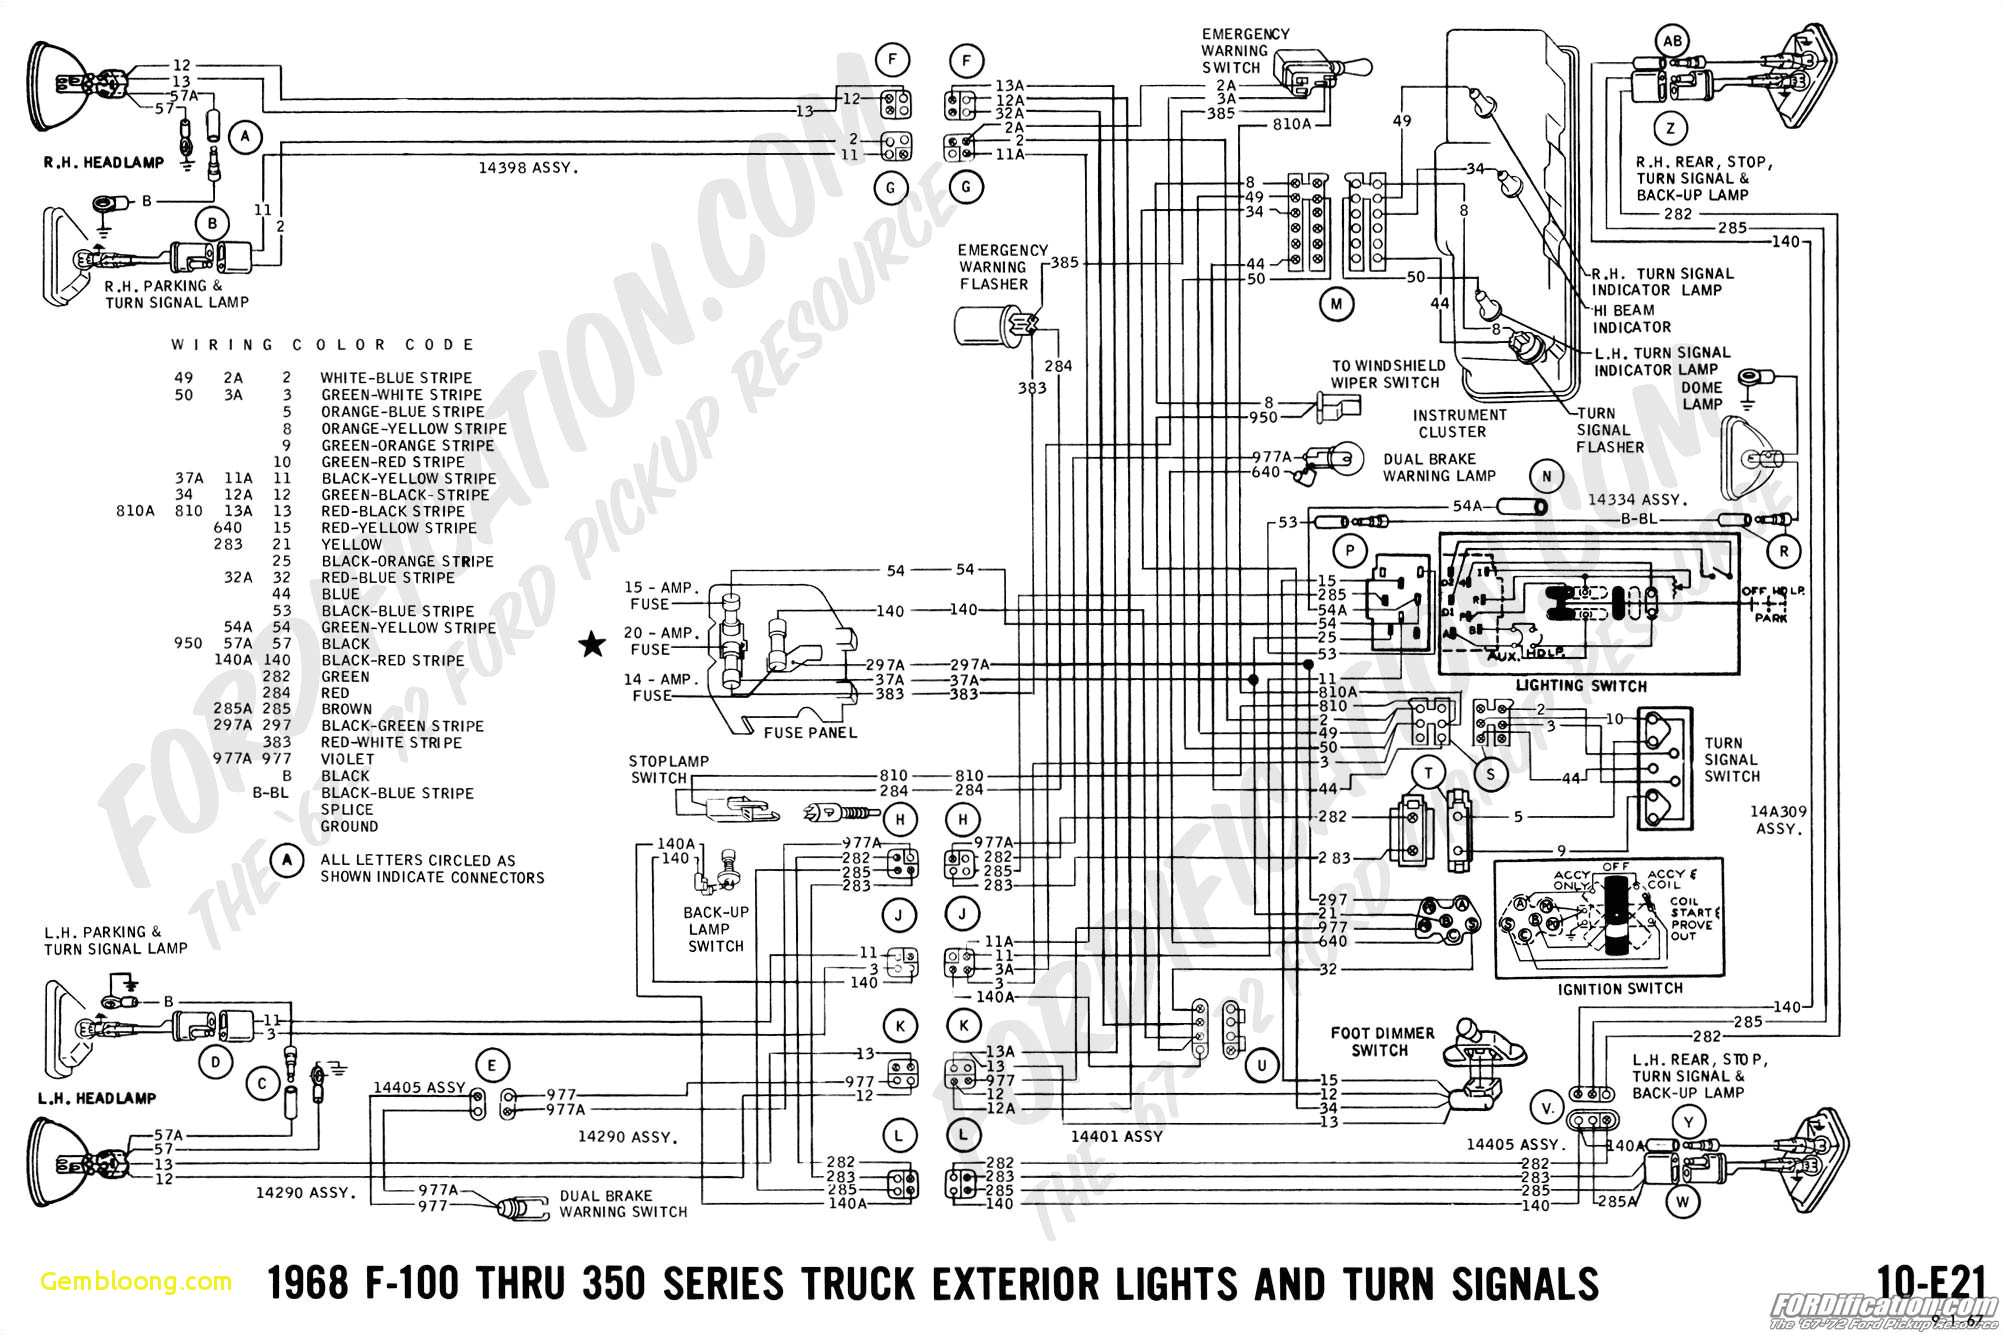 ford f100 pick up wiring diagrams wiring diagrams bib ford f100 pick up wiring diagrams